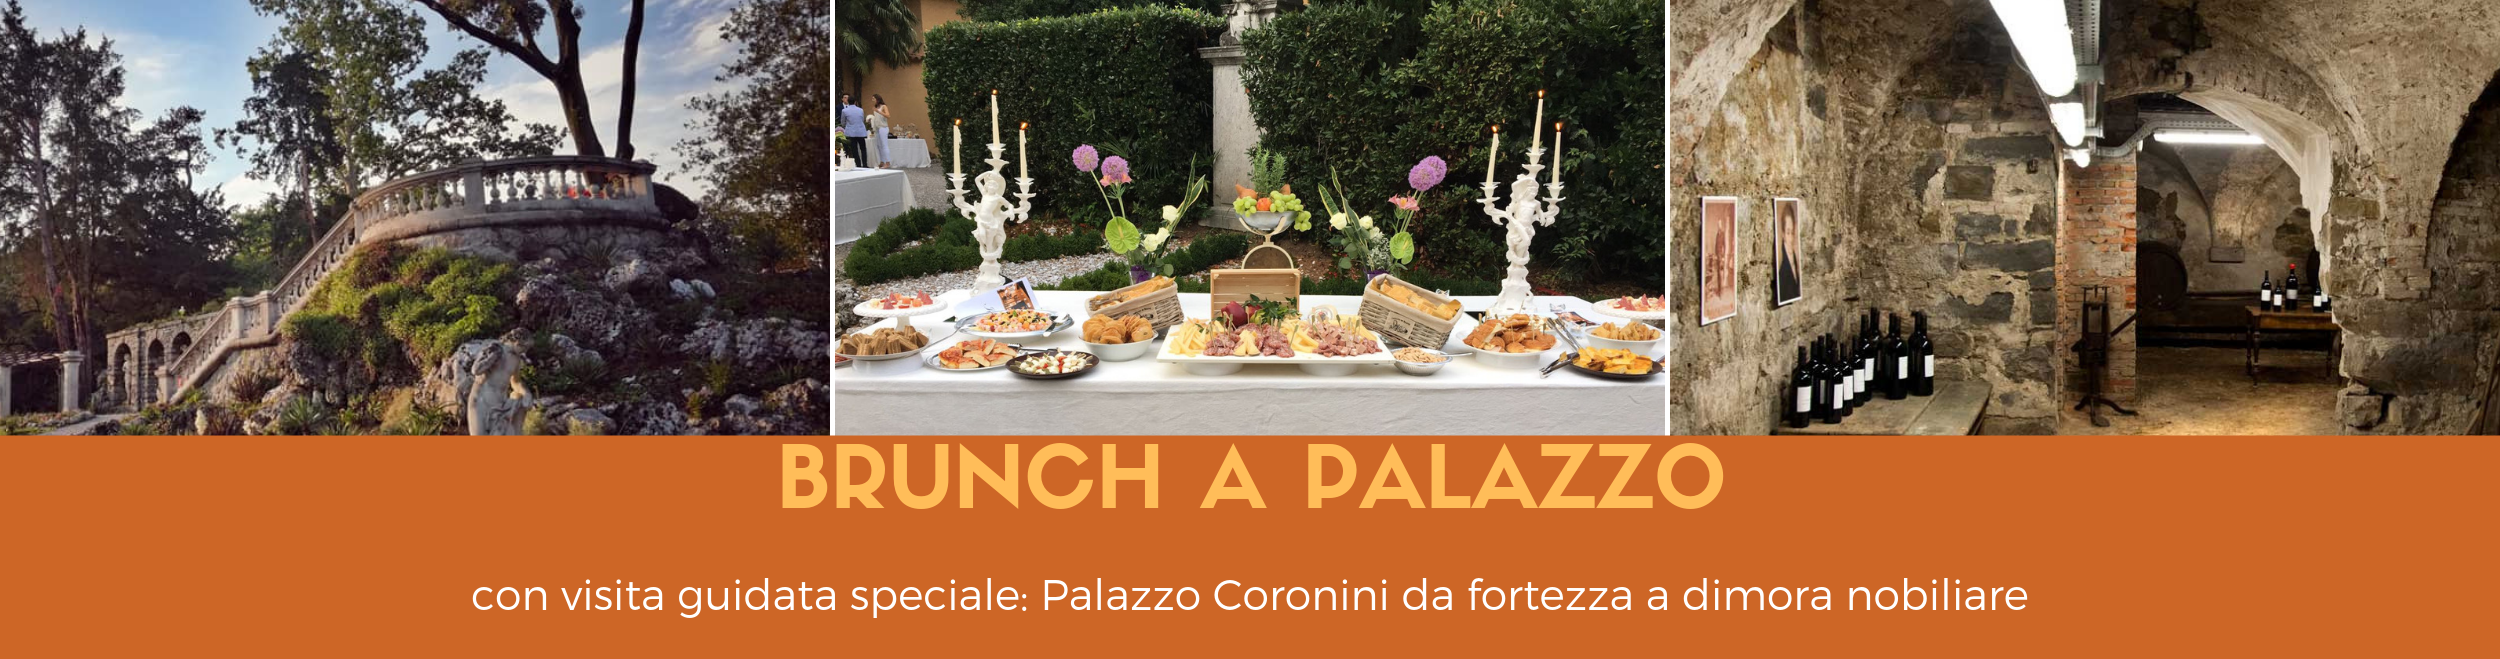 Brunch a Palazzo